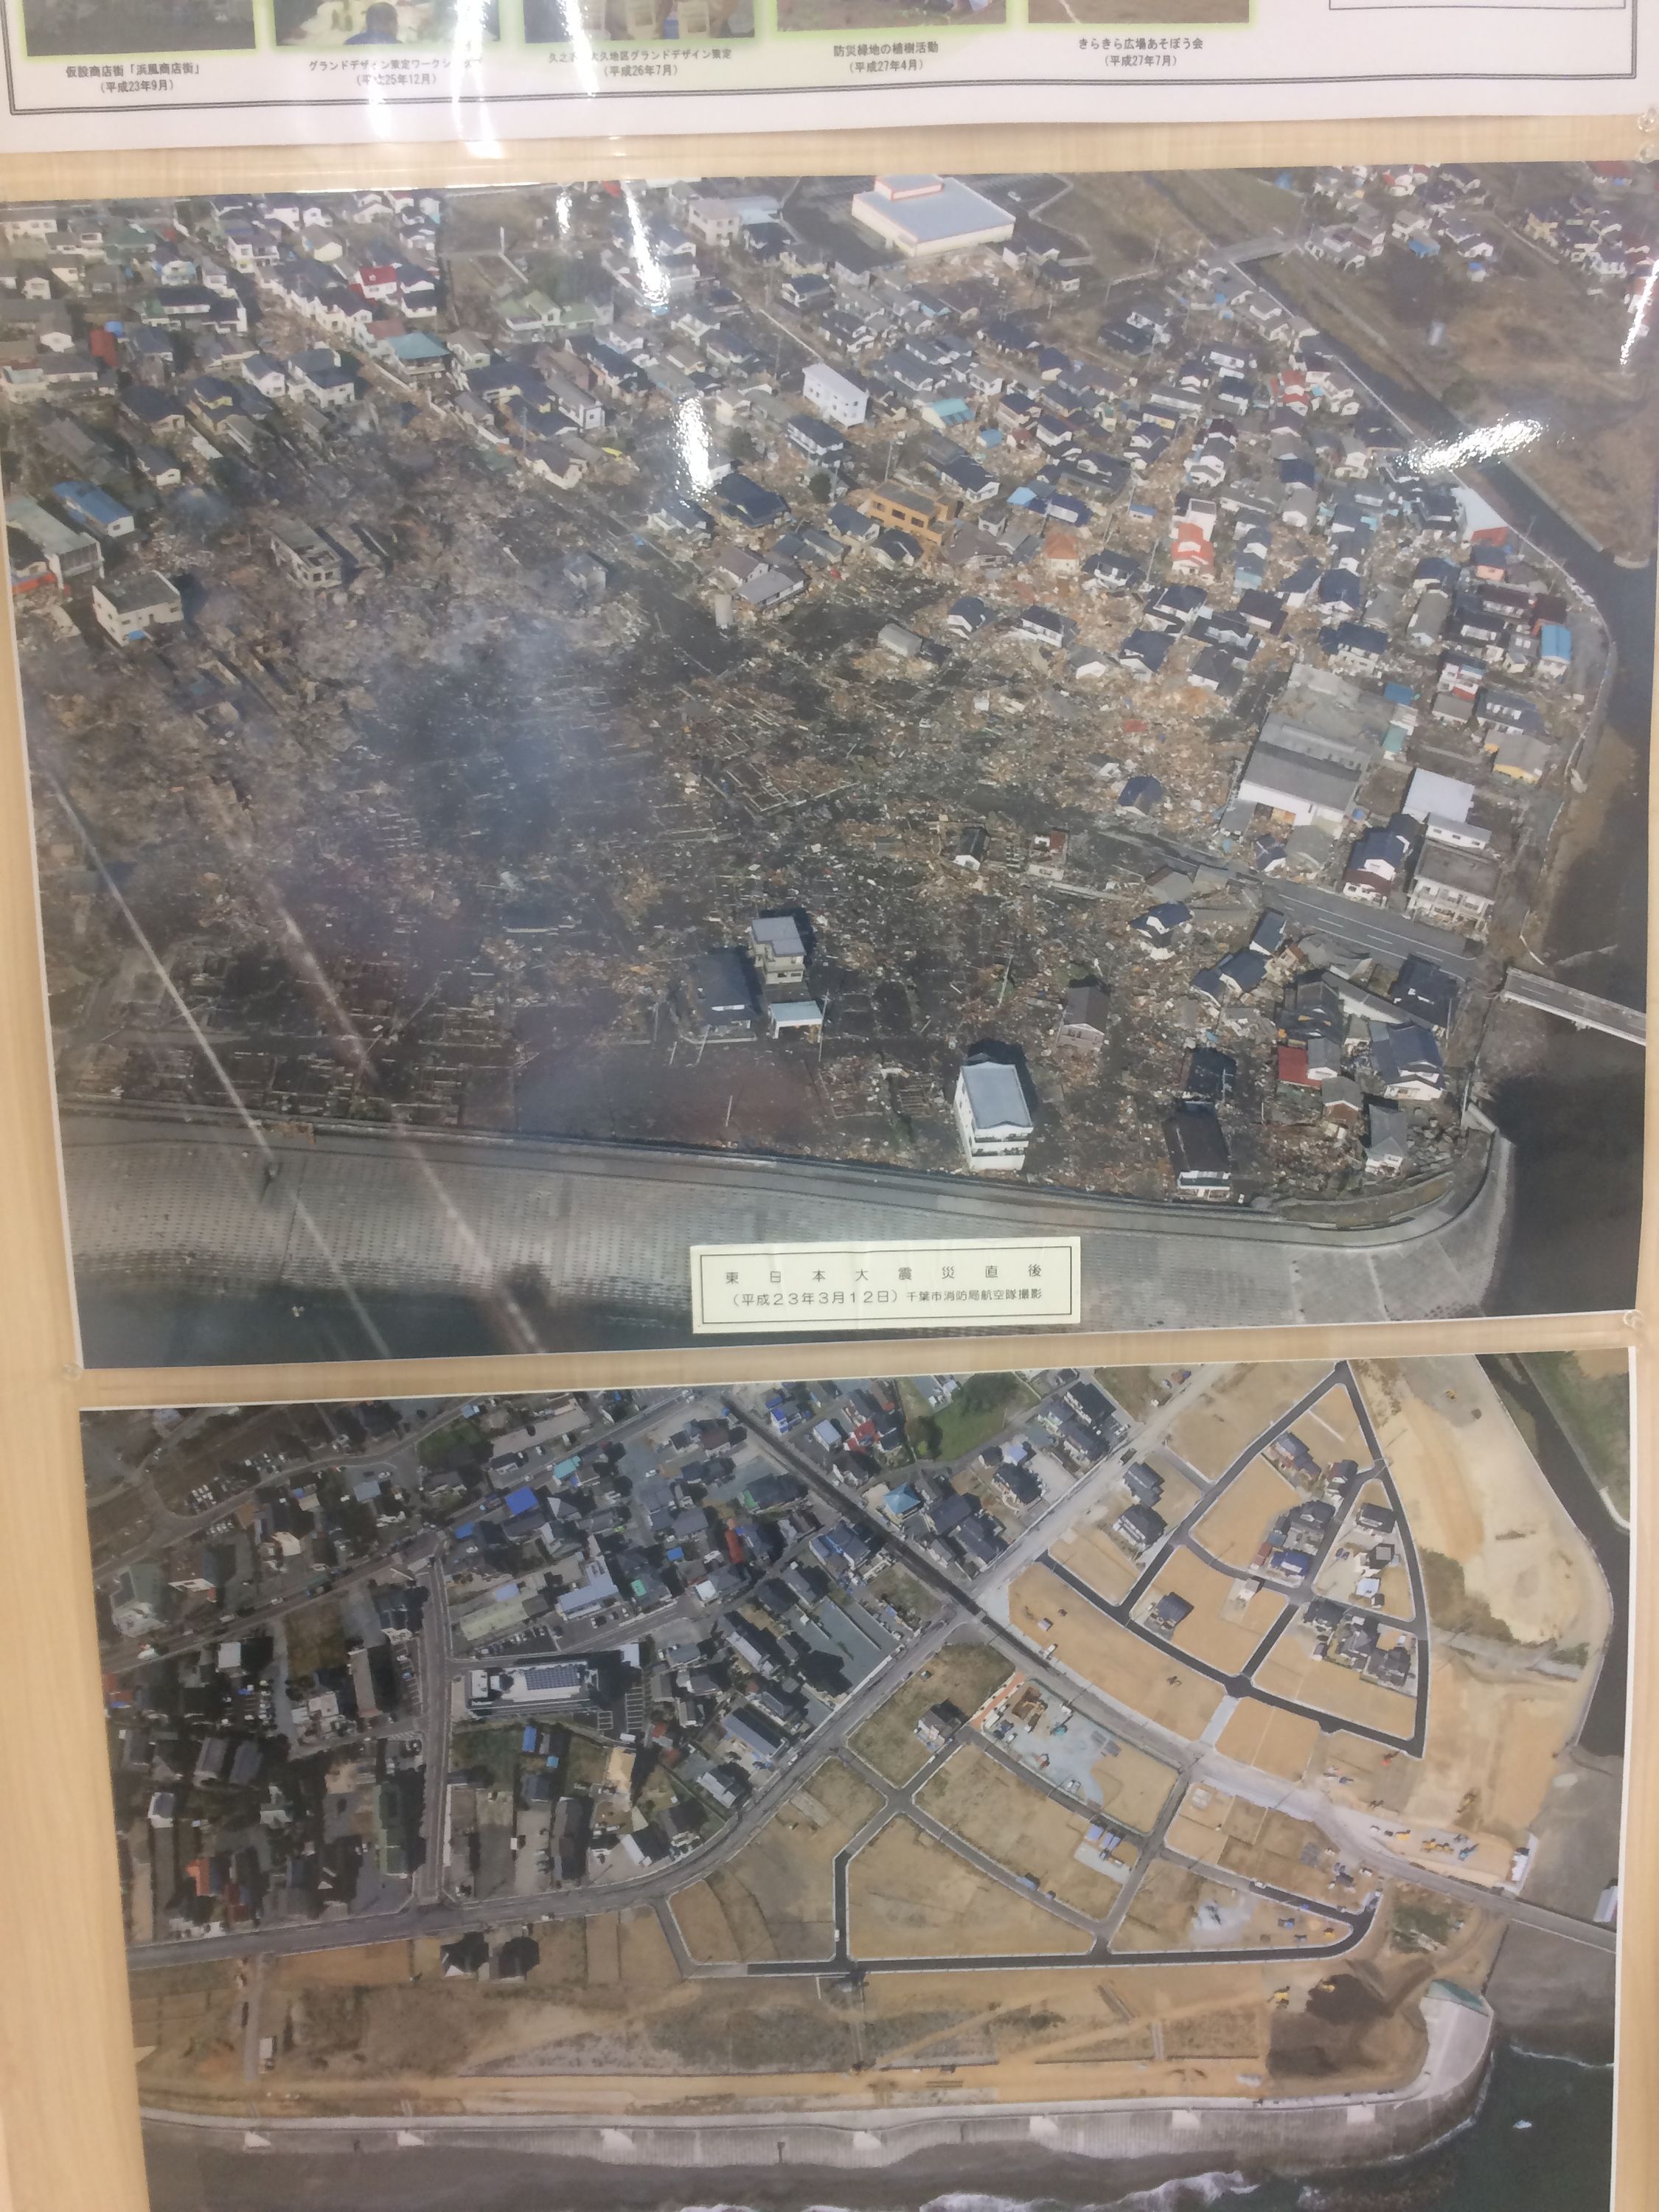 Before-and-after photos showing the destruction of Hisanohama in the 2011 tsunami.